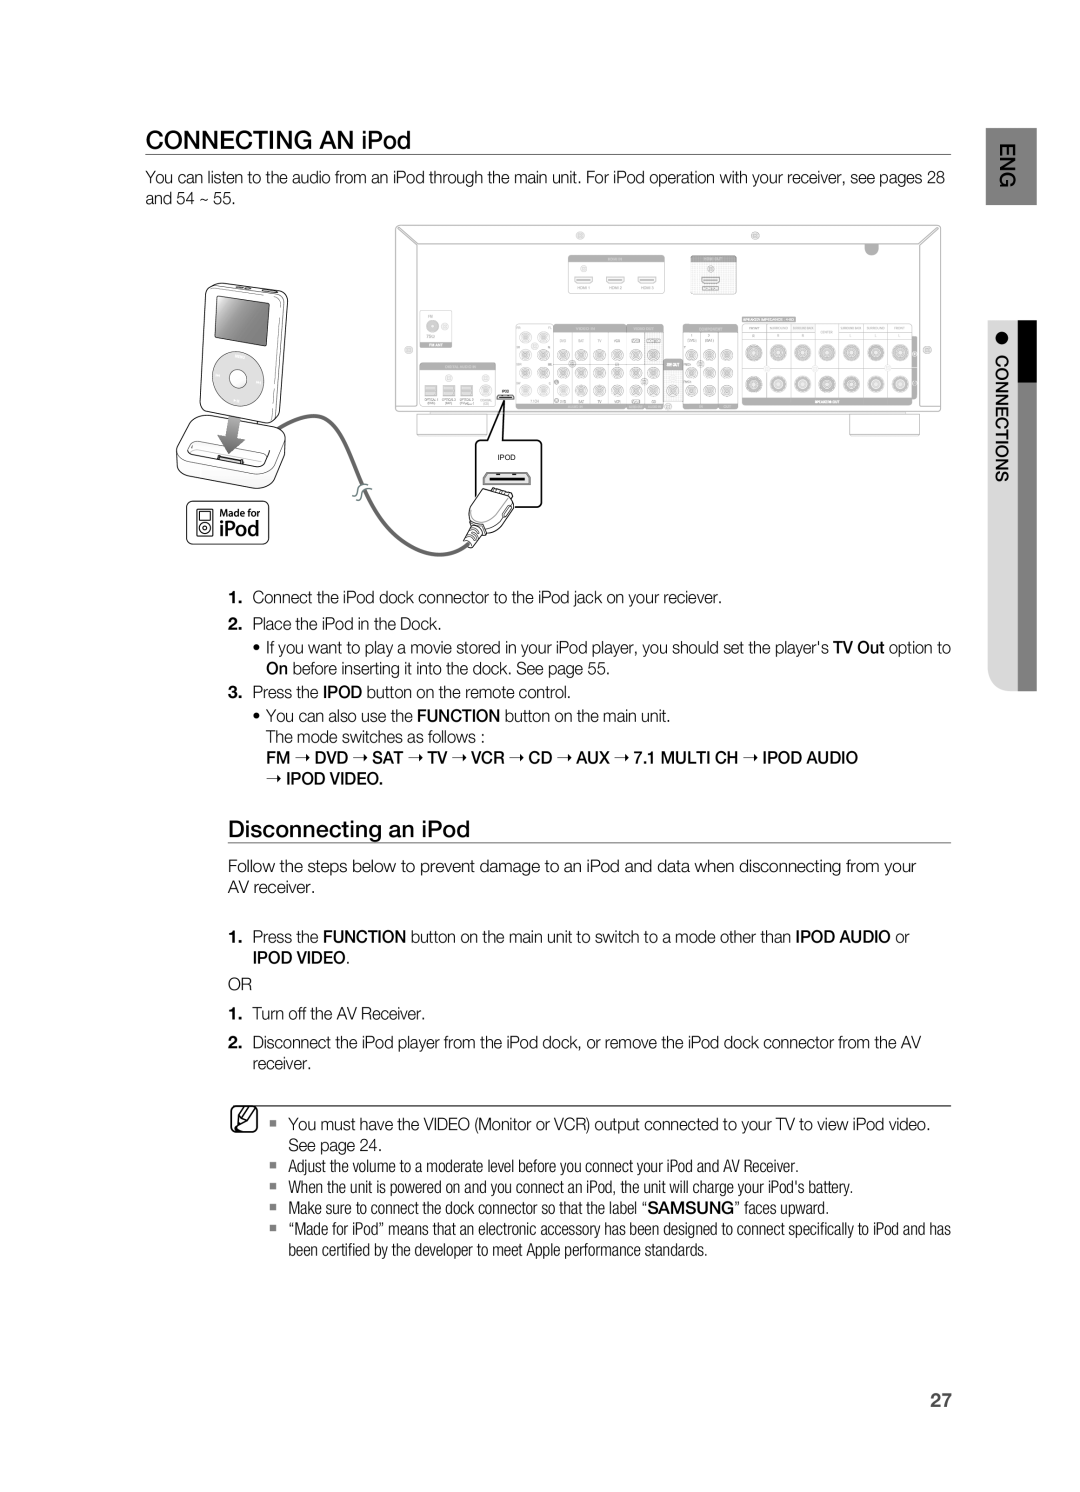 Samsung HT-AS730S user manual Connecting an iPod, Disconnecting an iPod 